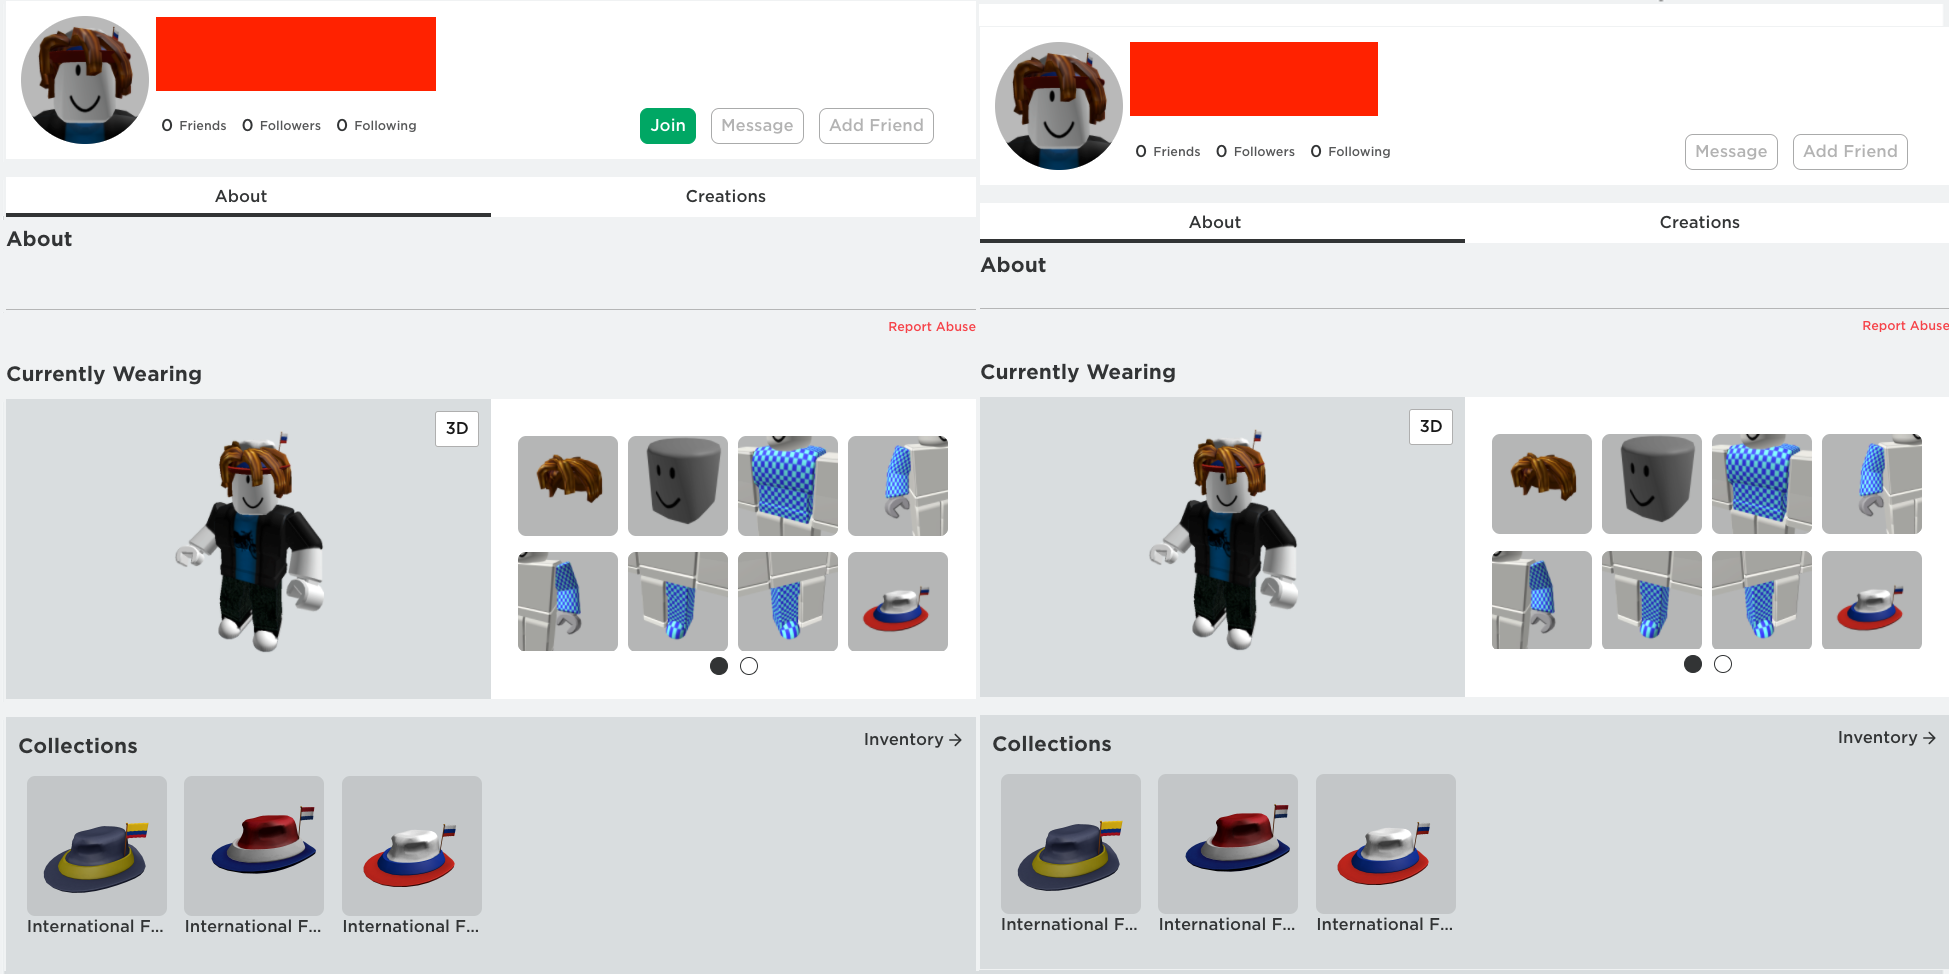 Chrome Extensions Steal Roblox Currency, Uses Discord